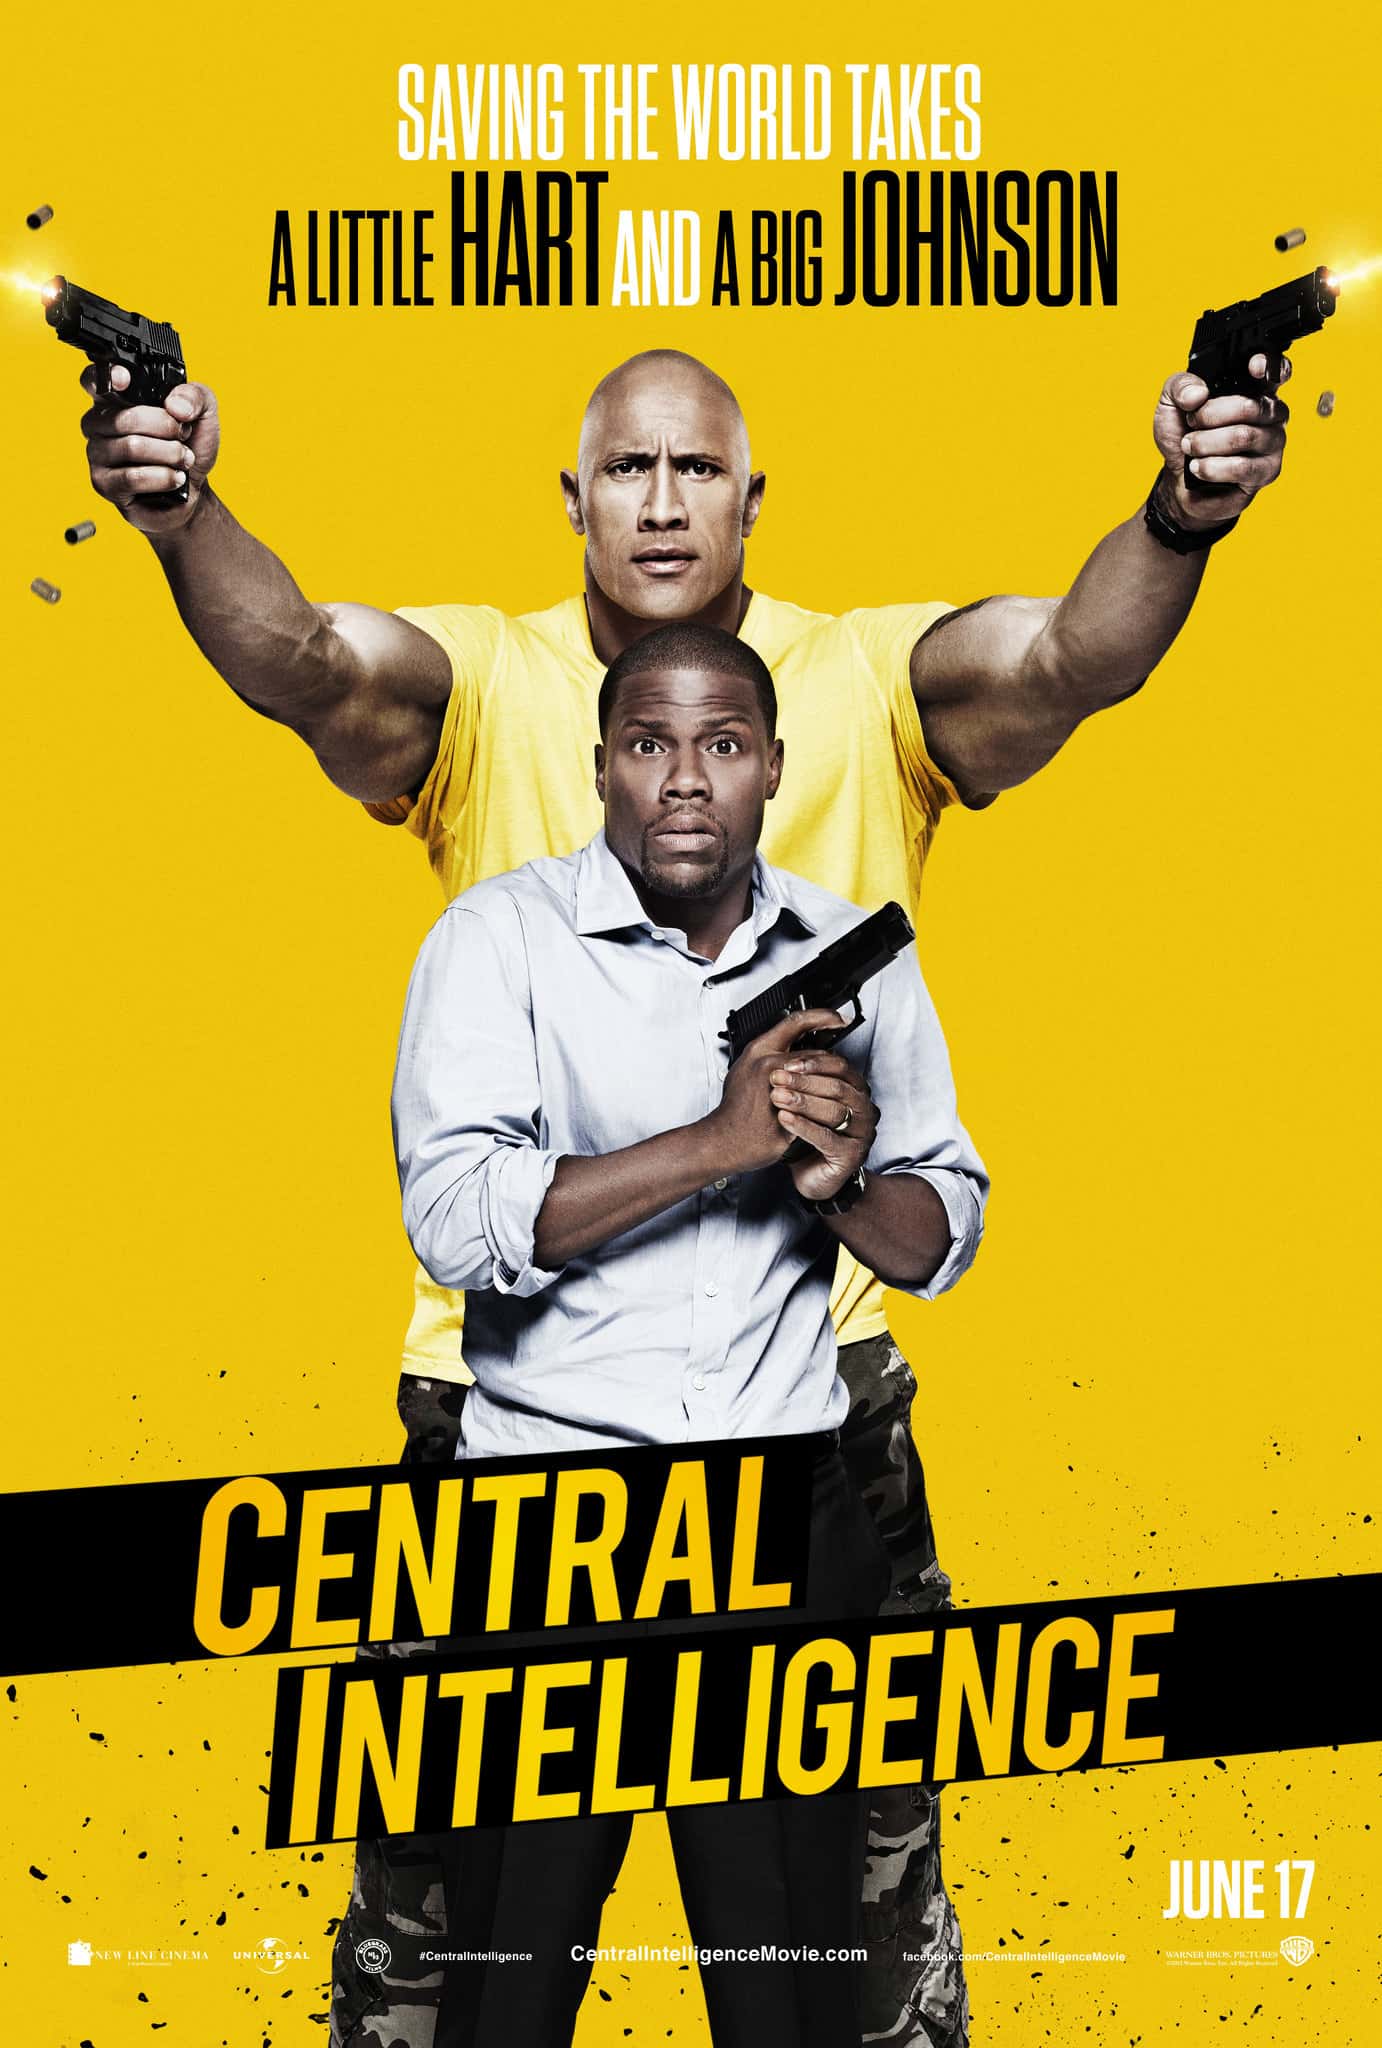 Central Intelligence (2016) Best Kevin Hart Movies (Ranked)